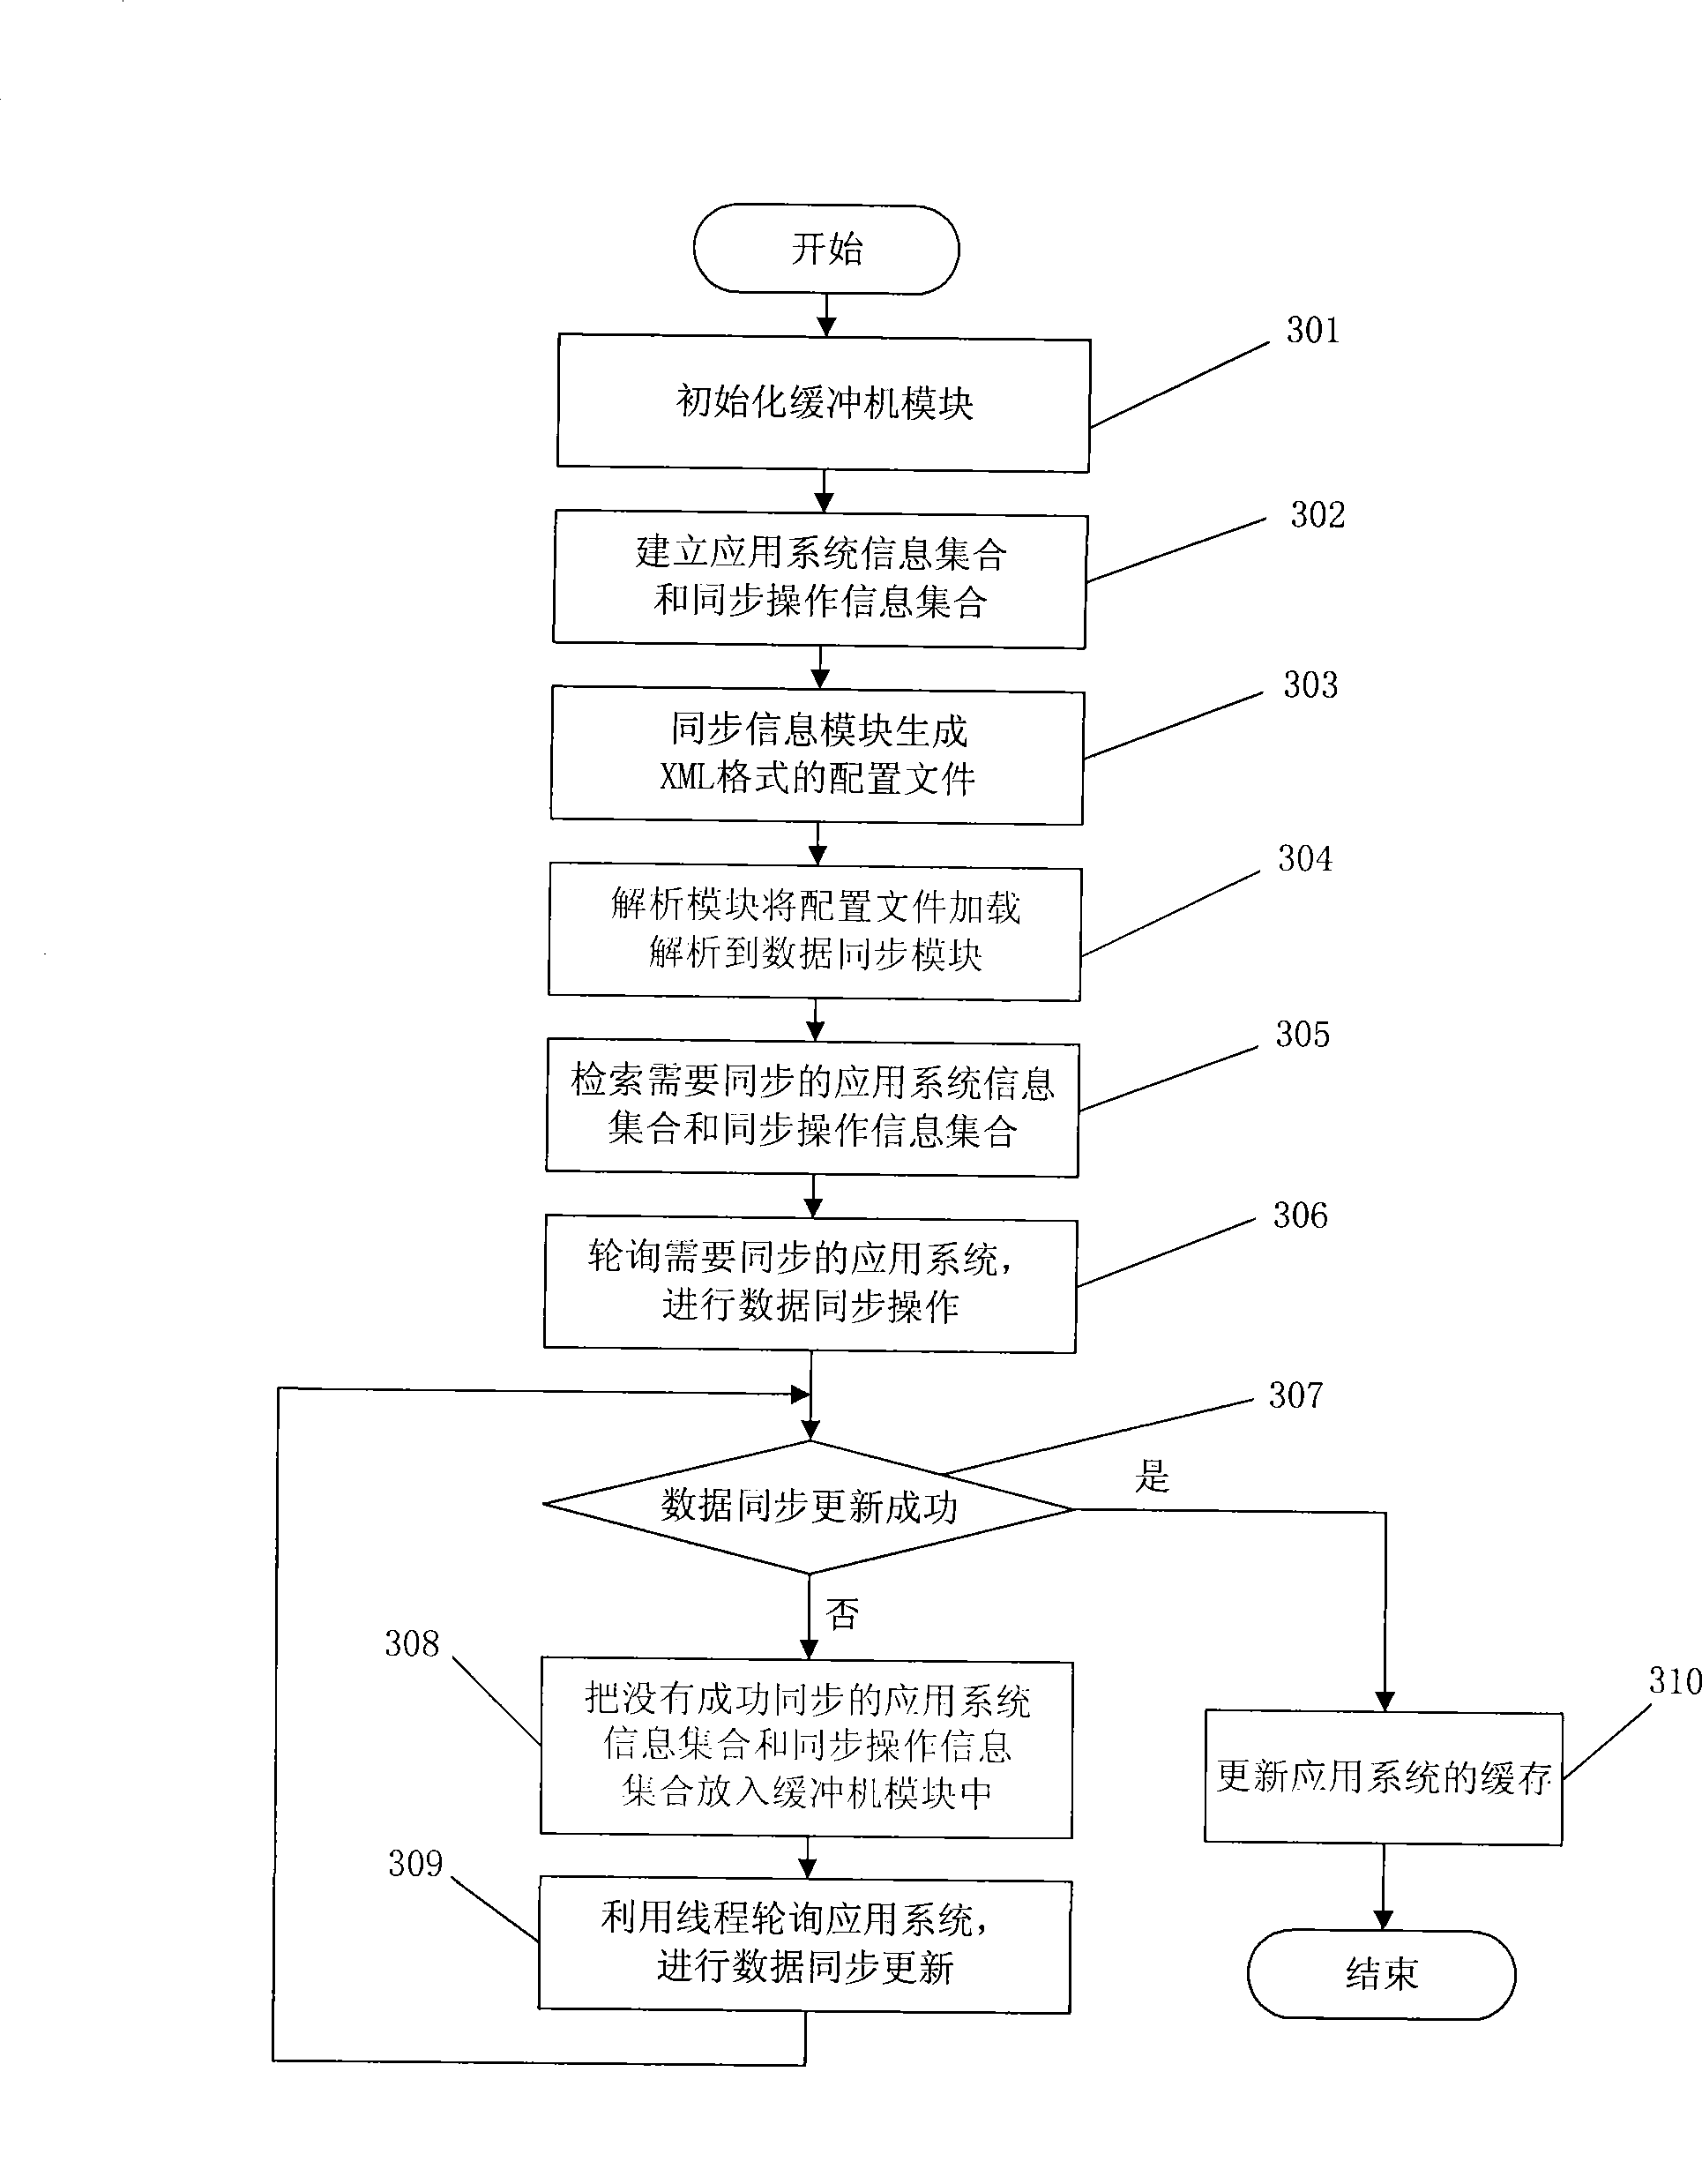 Method and device for data synchronization between application systems